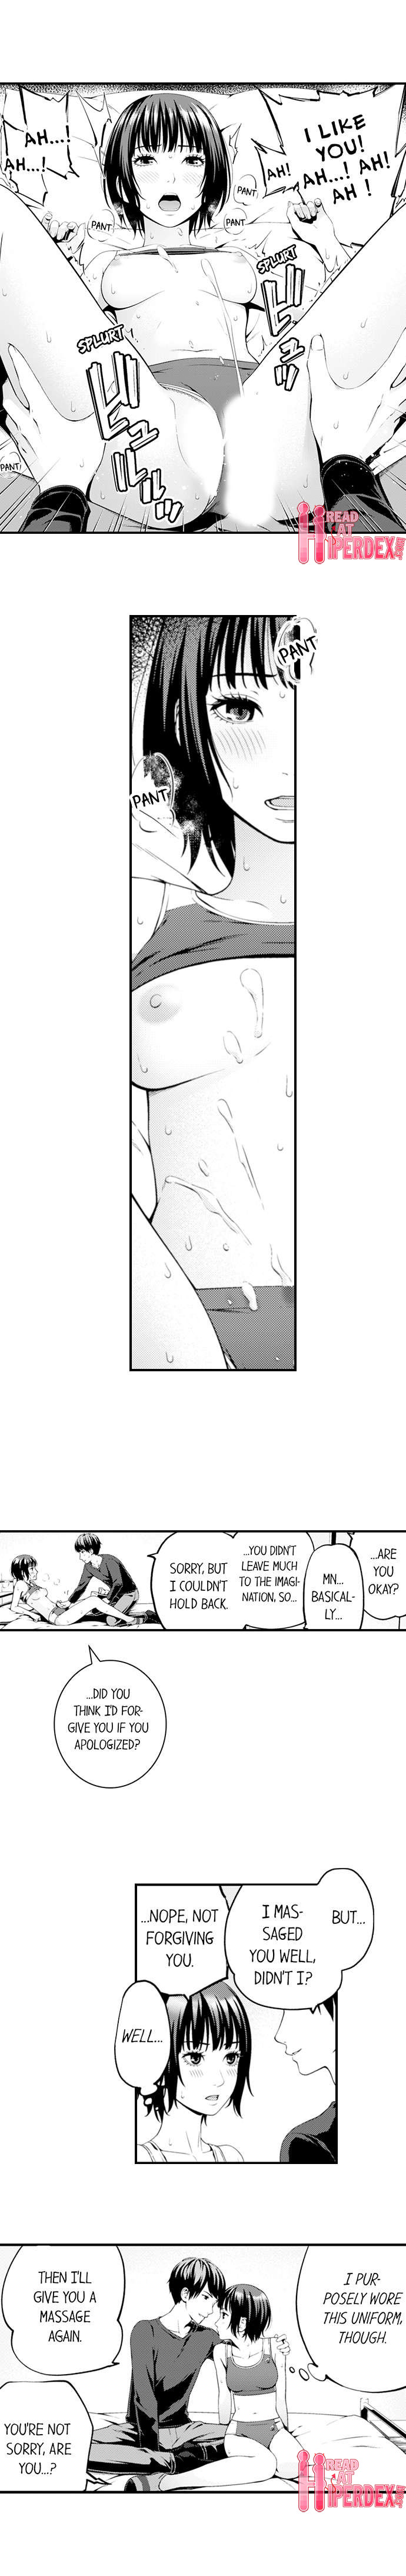 The Massage ♂♀ The Pleasure of Full Course Sex Chapter 5 - Page 9